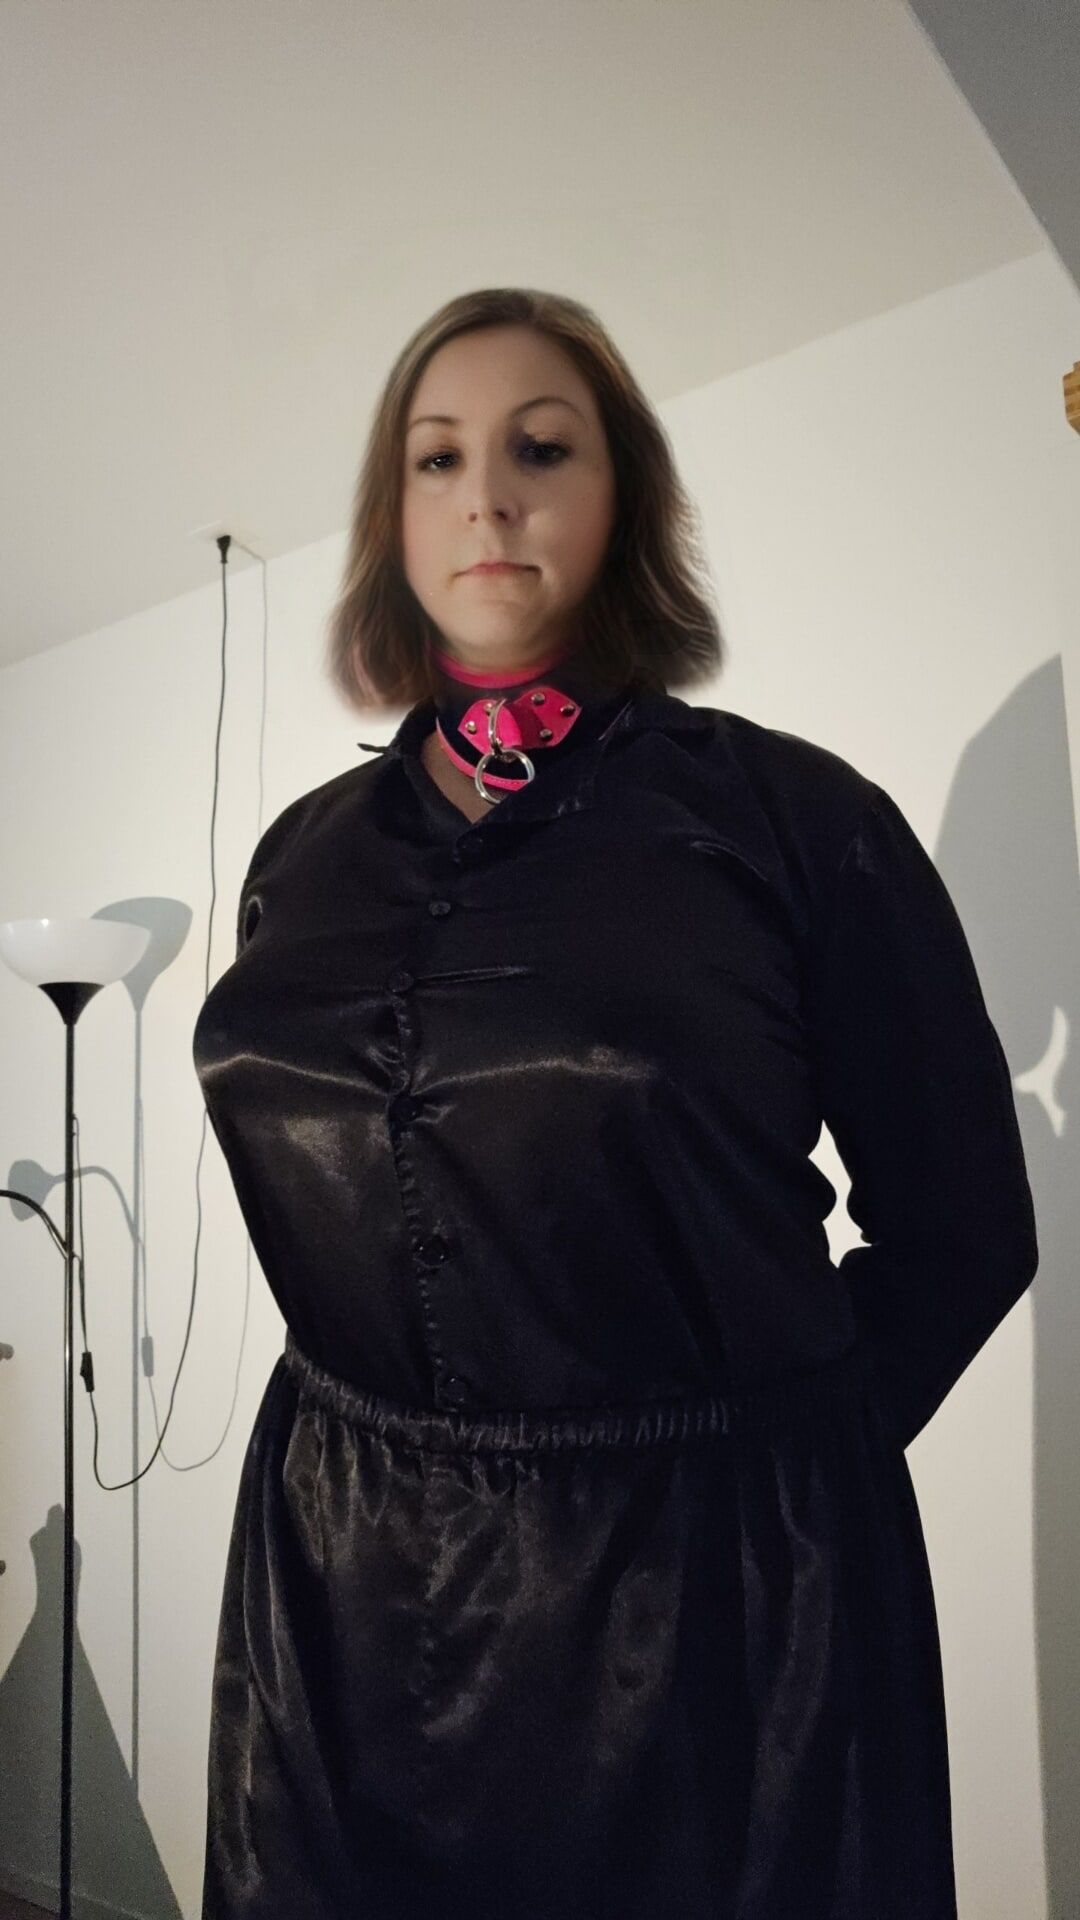 My new satin outfit